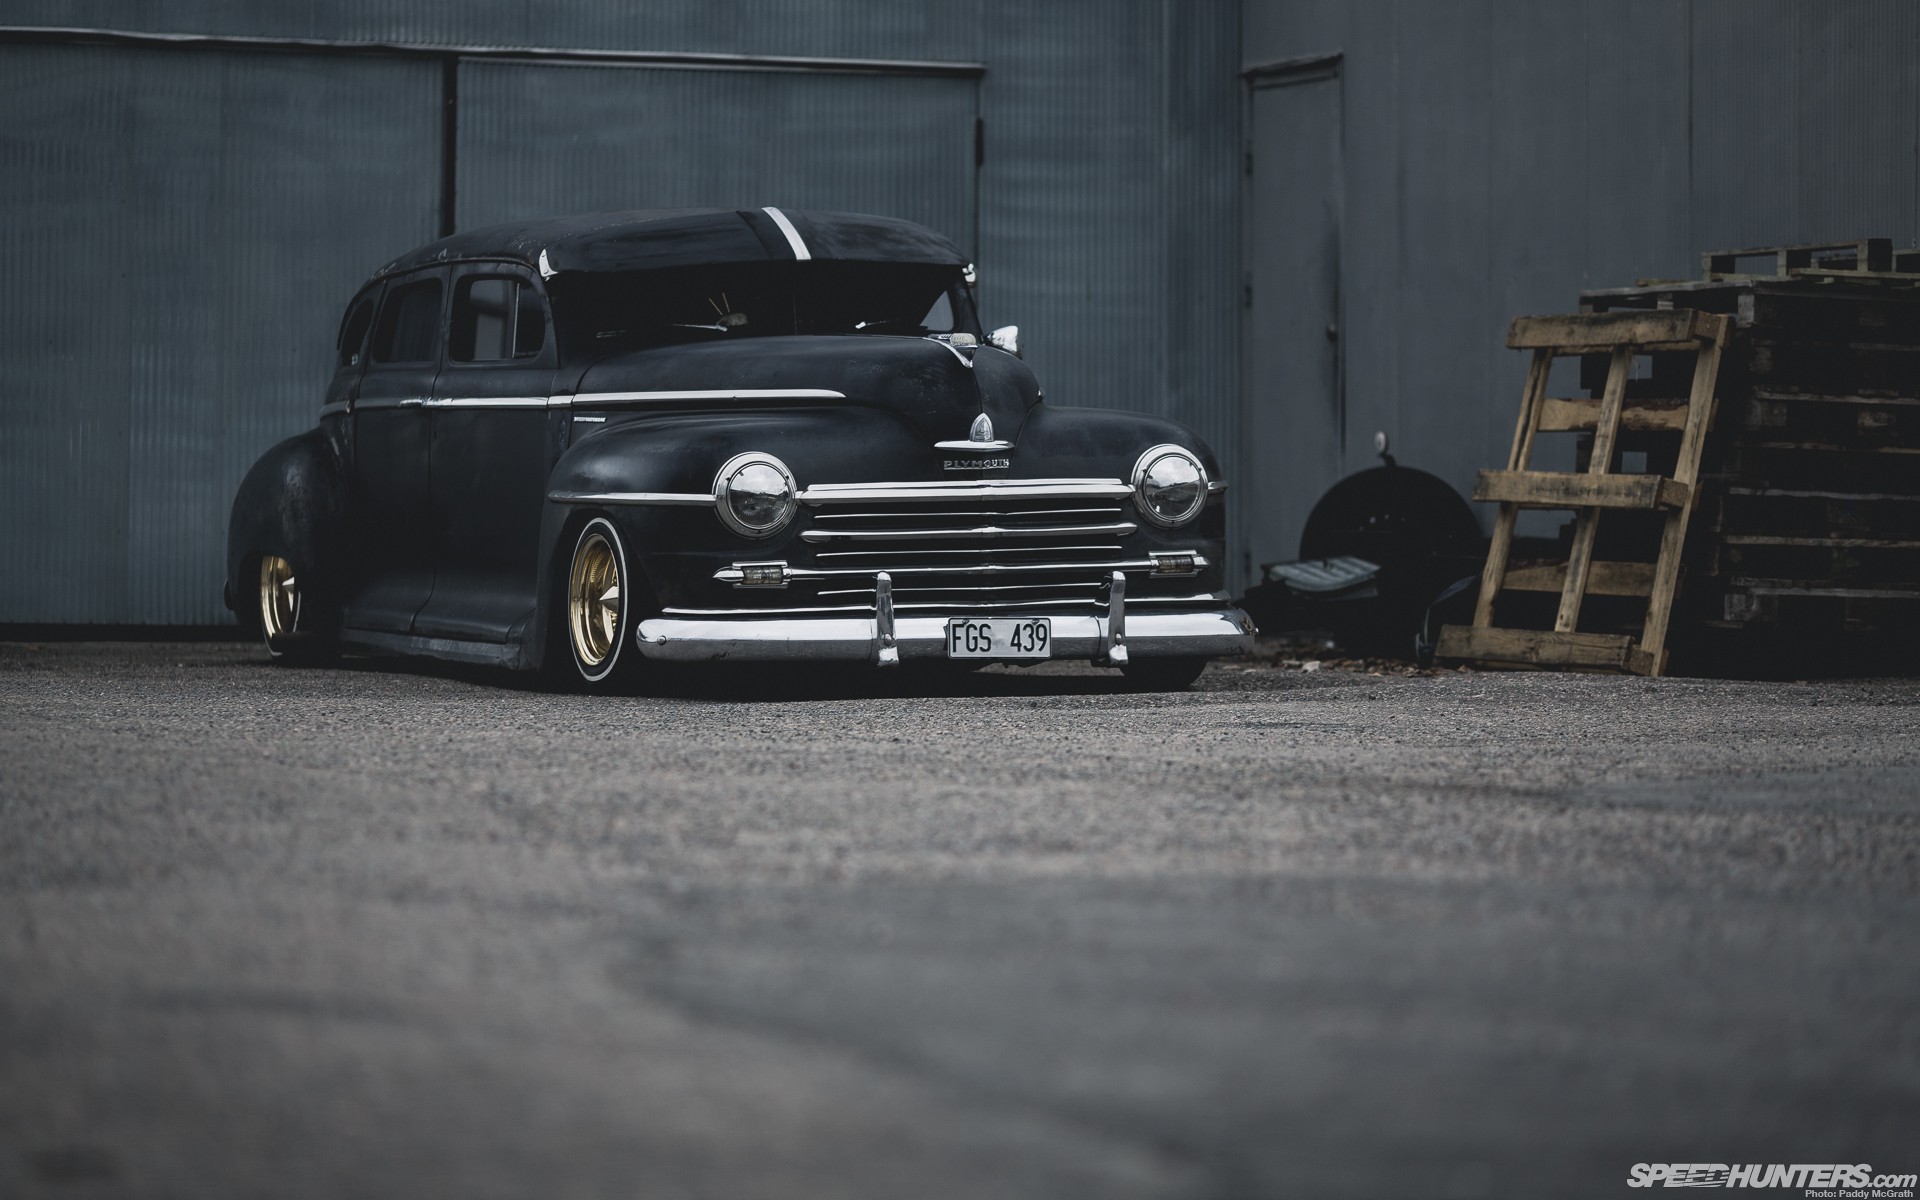 cars, Plymouth, Rusted, Tuning, Black, Cars, Drift, Garage, Speedhunters, Low, Rider, Jdm Wallpaper